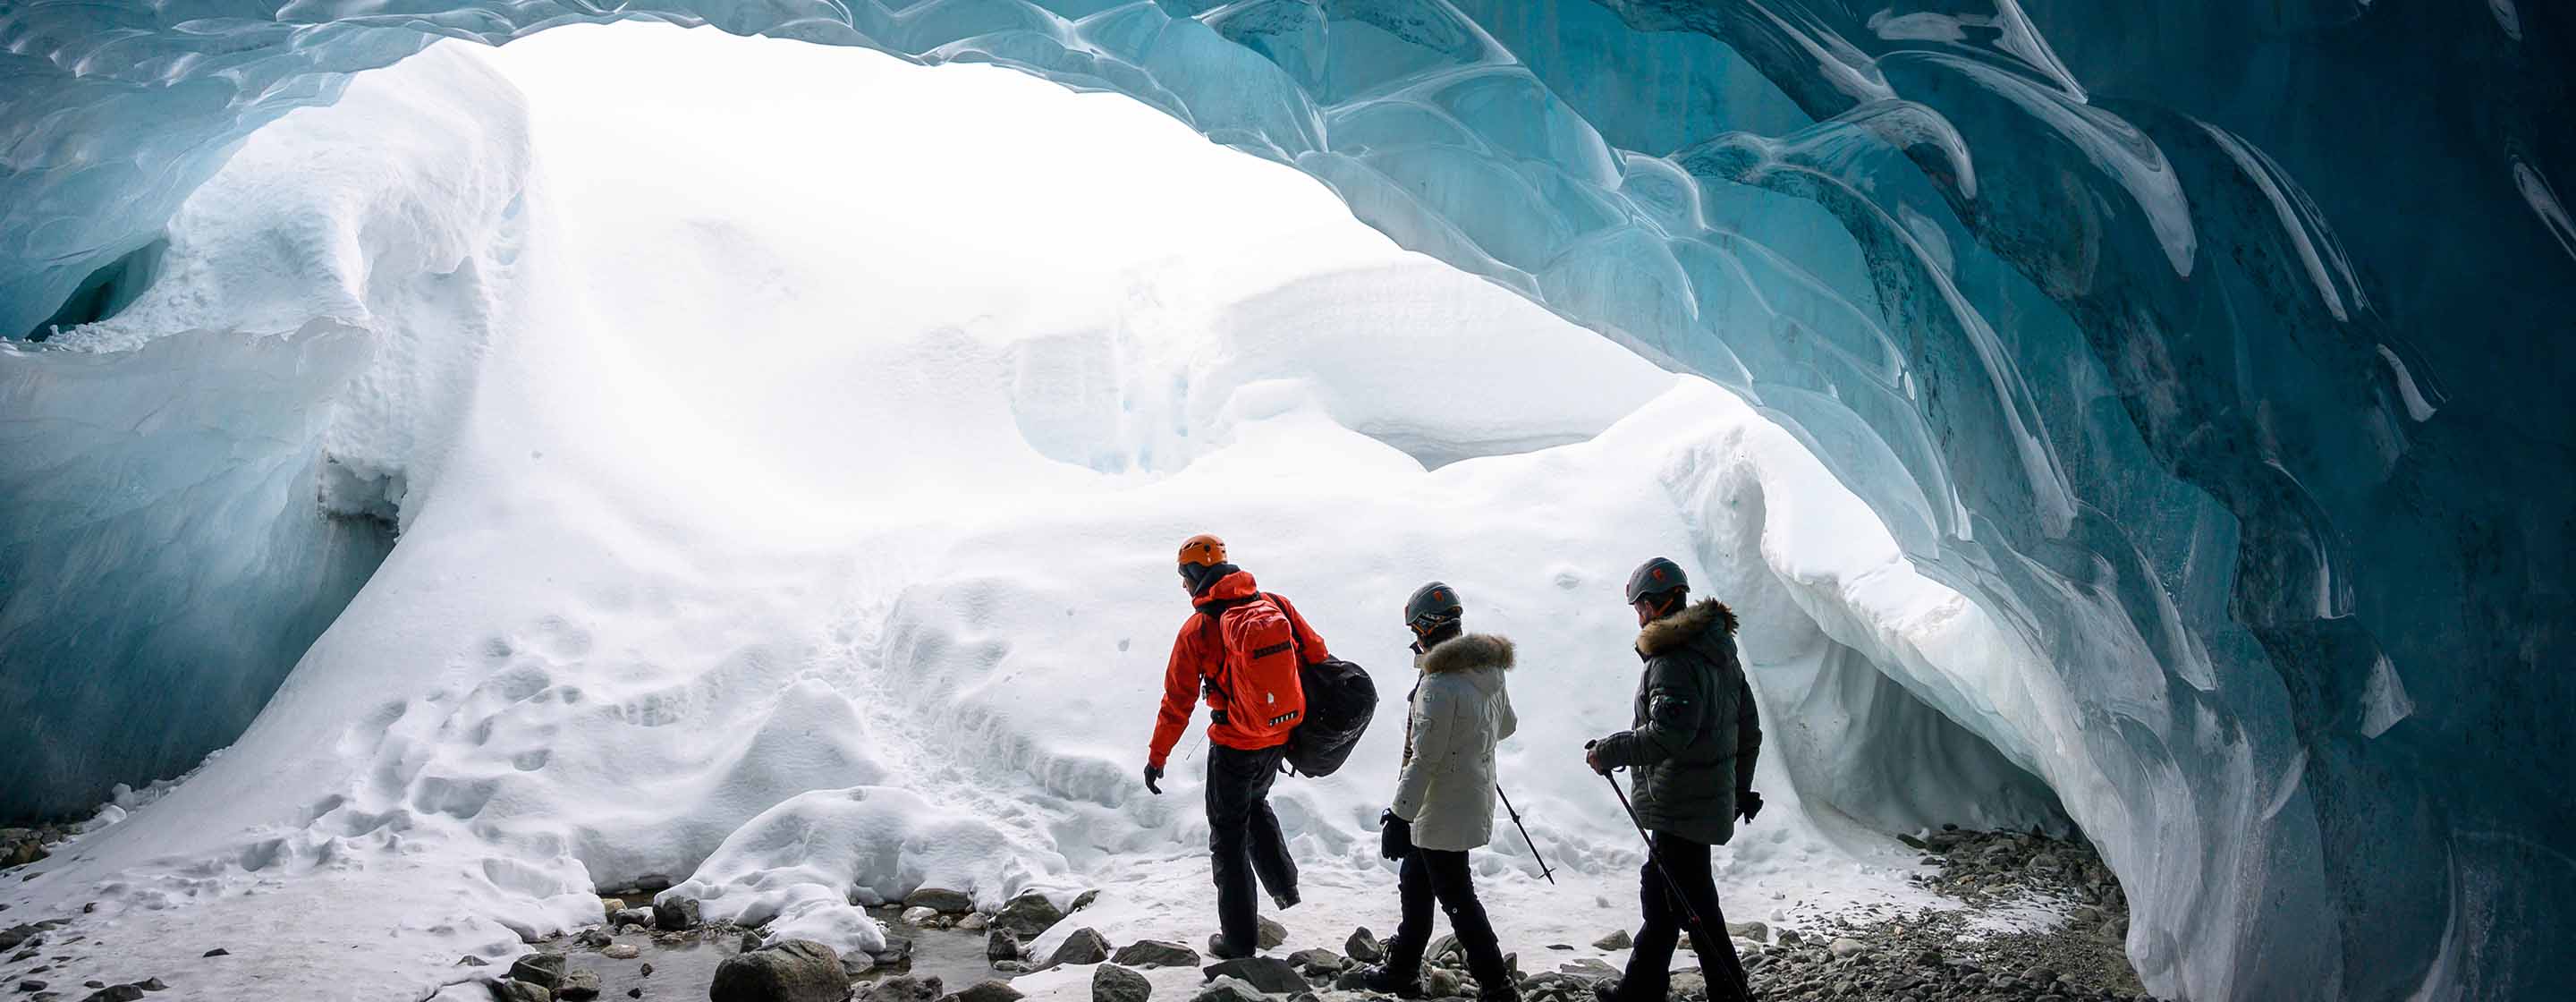 Guided tour at an ice cave